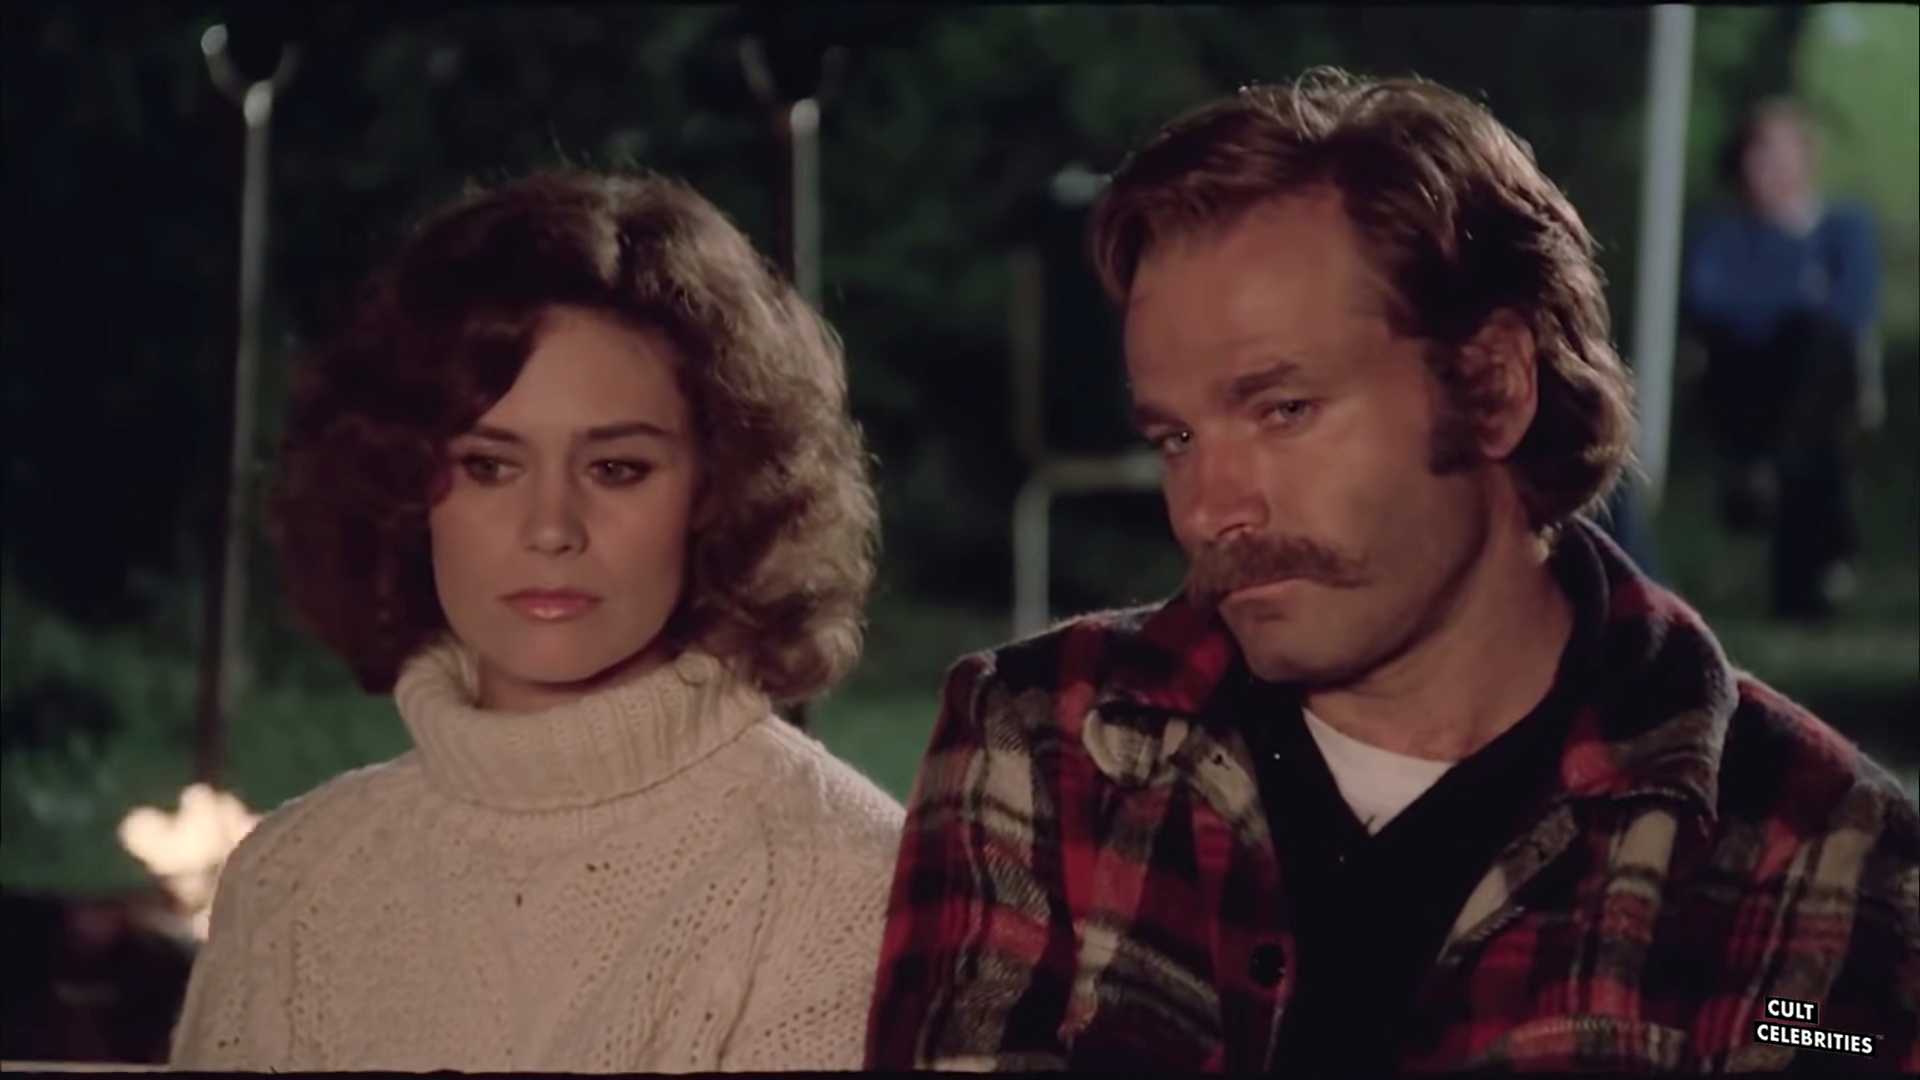 Franco Nero and Corinne Cléry in Hitch-Hike (1977)